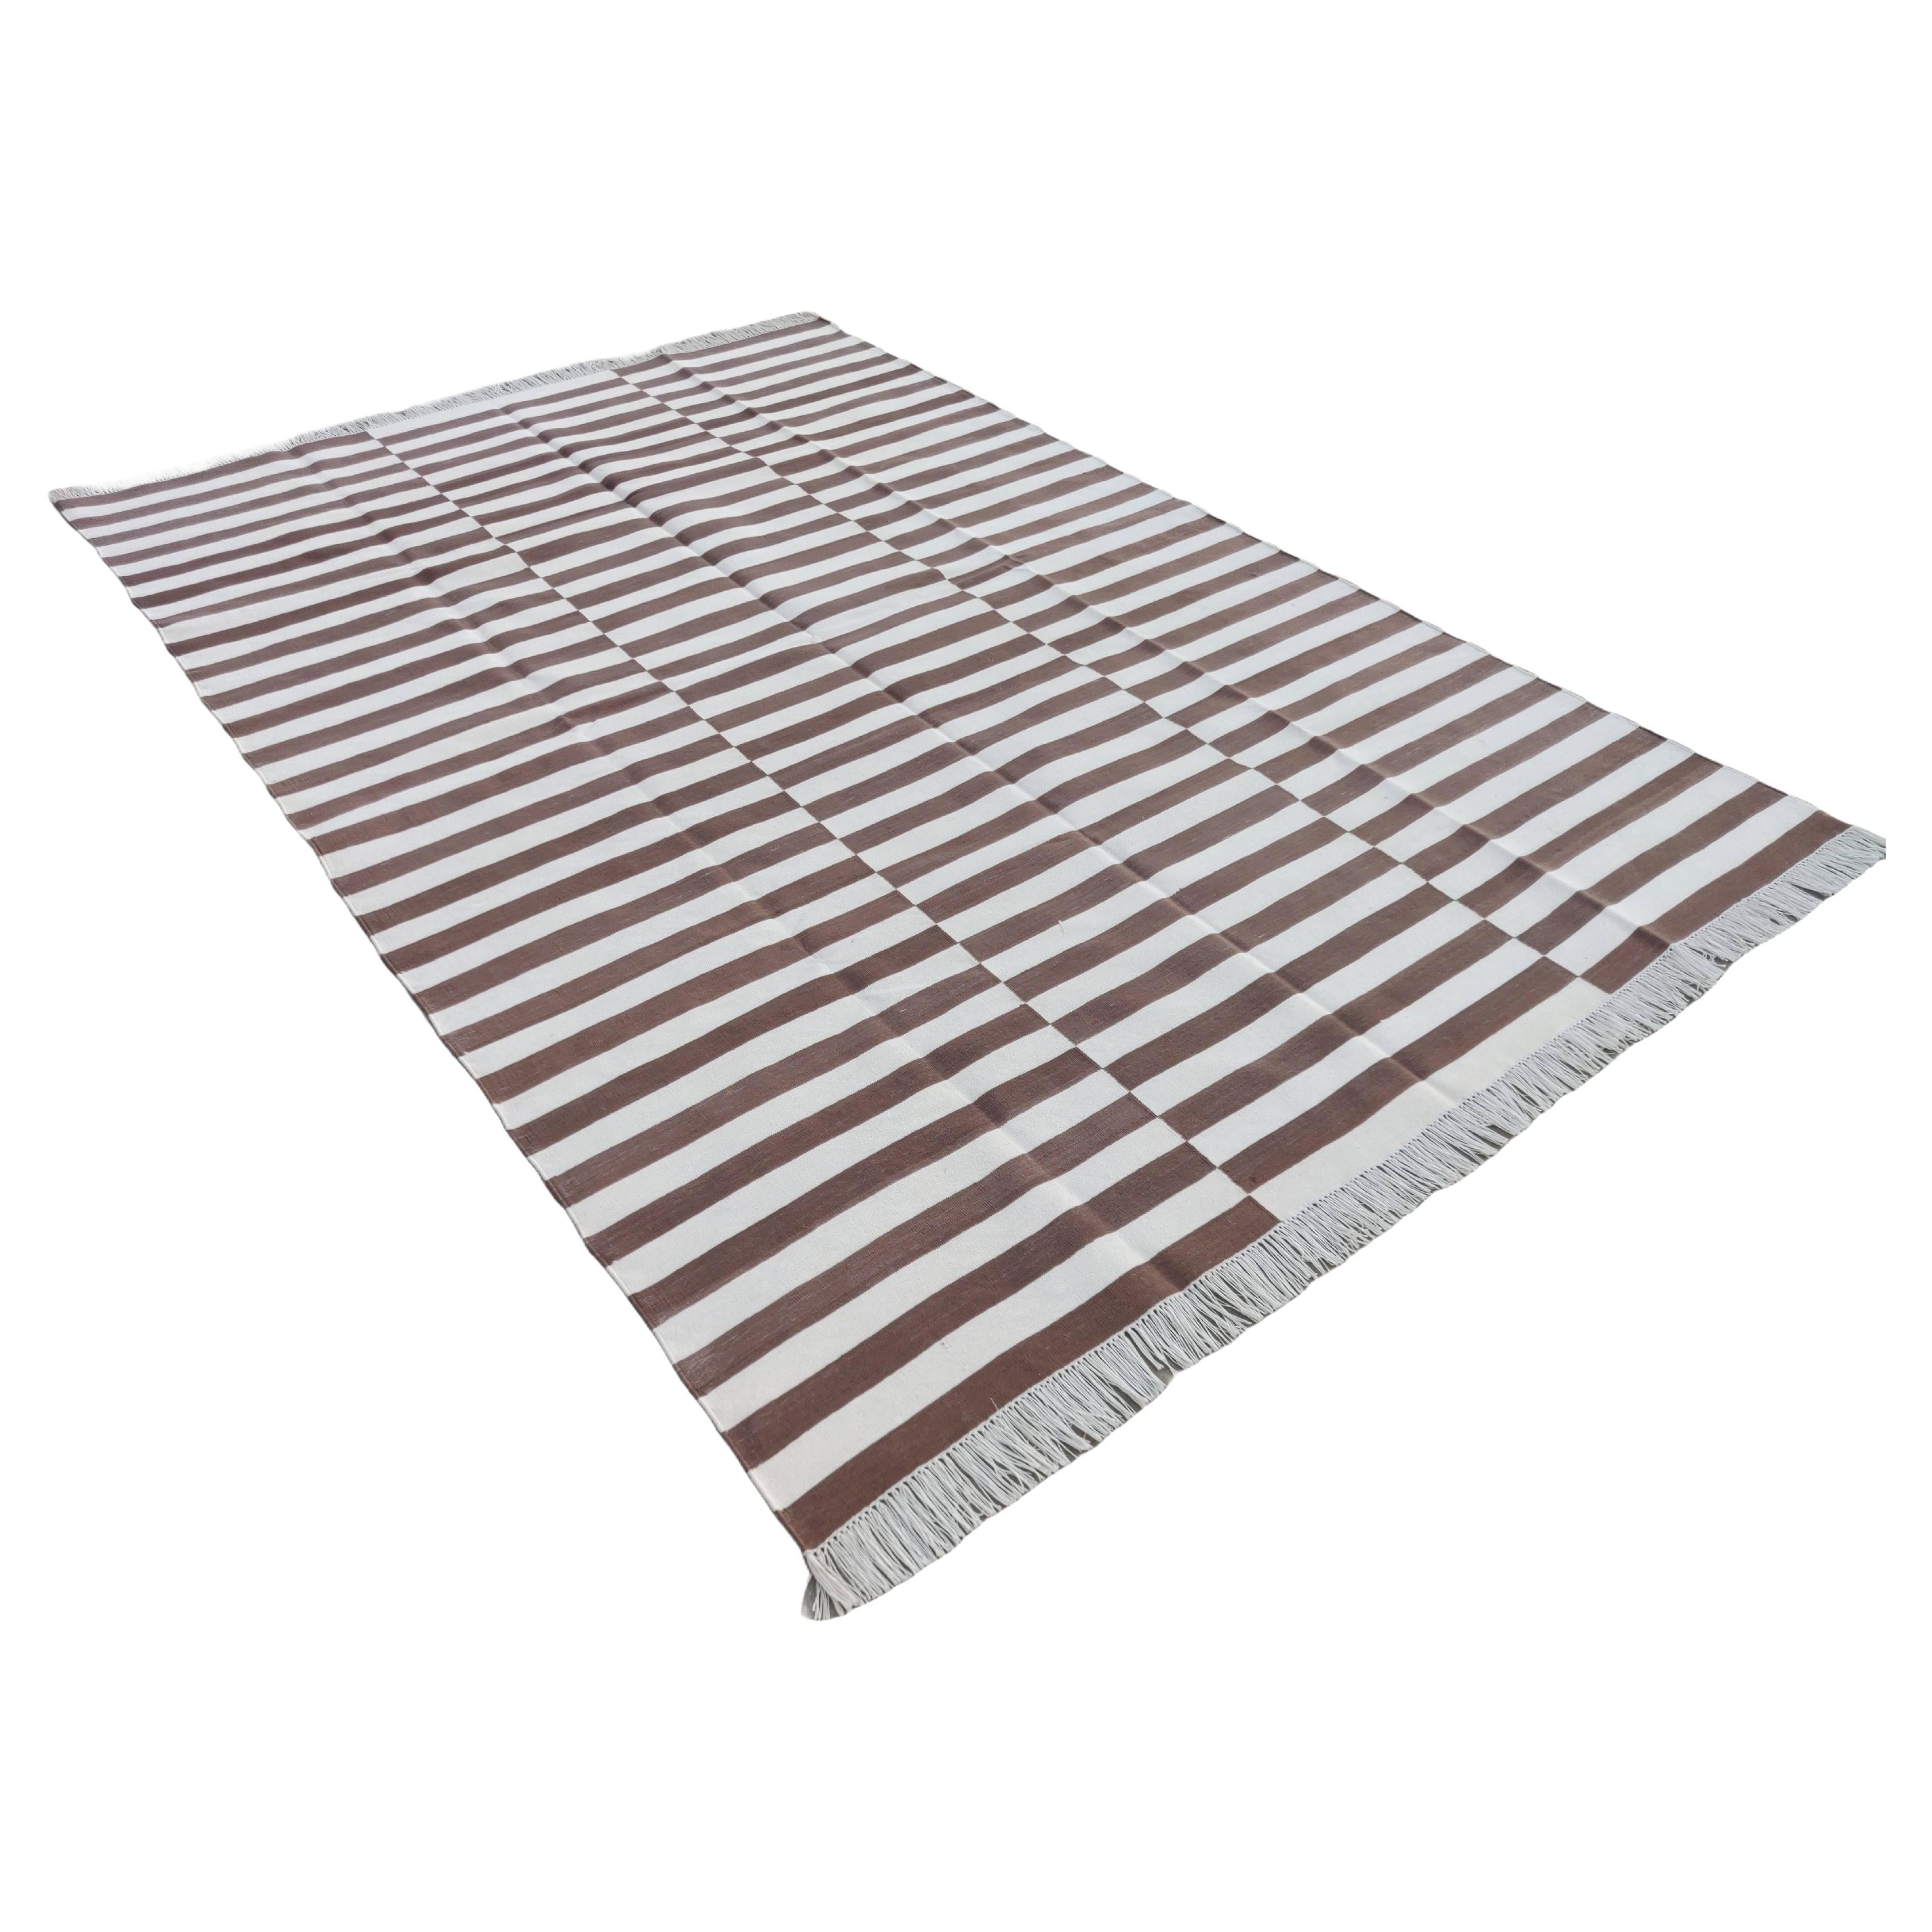 Handmade Cotton Area Flat Weave Rug, Brown And White Striped Indian Dhurrie Rug For Sale